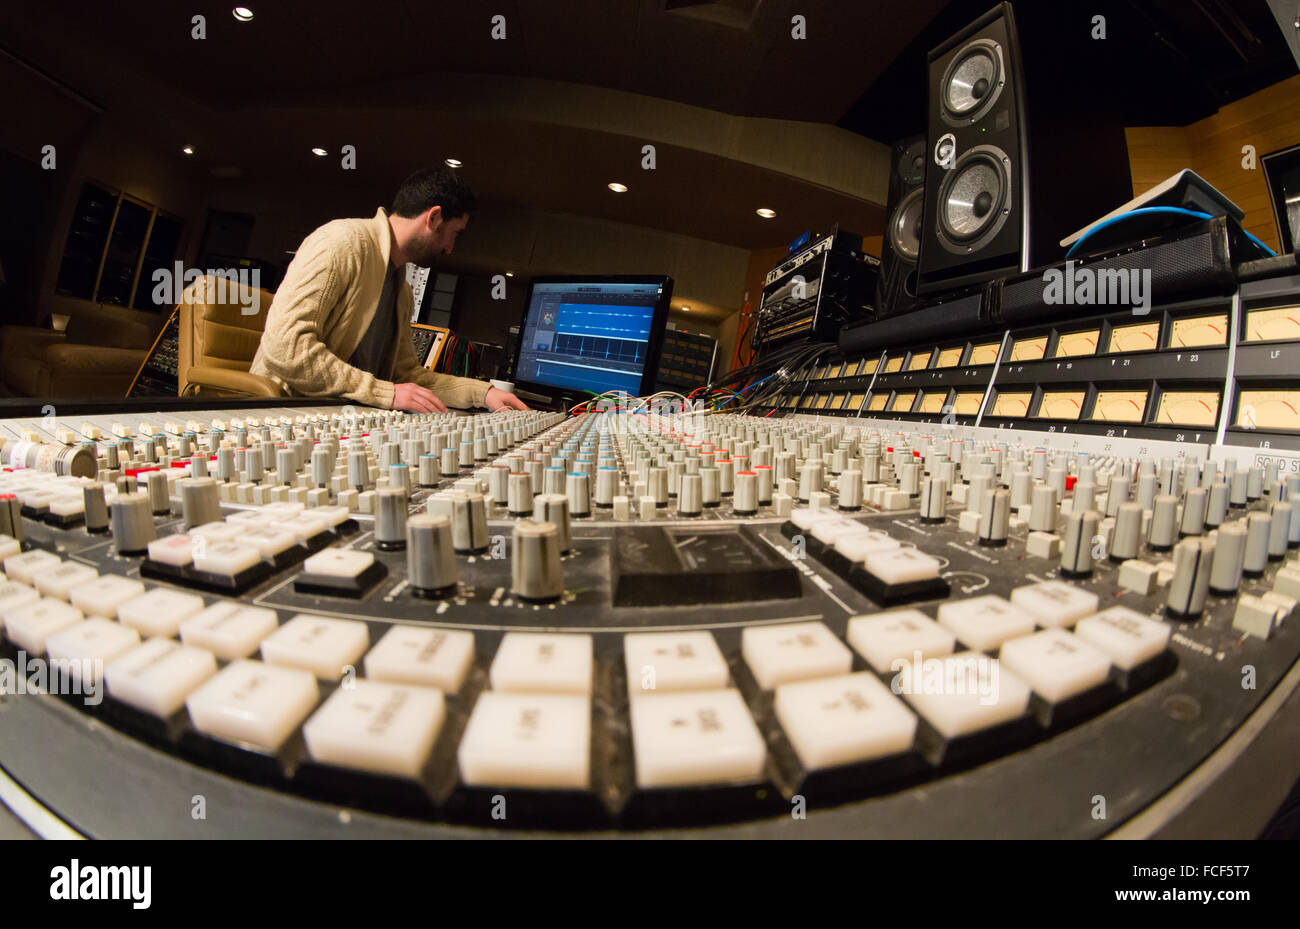 side view of someone working on an ssl e series sound mixing desk and apple mac with studio speakers in a recording studio Stock Photo